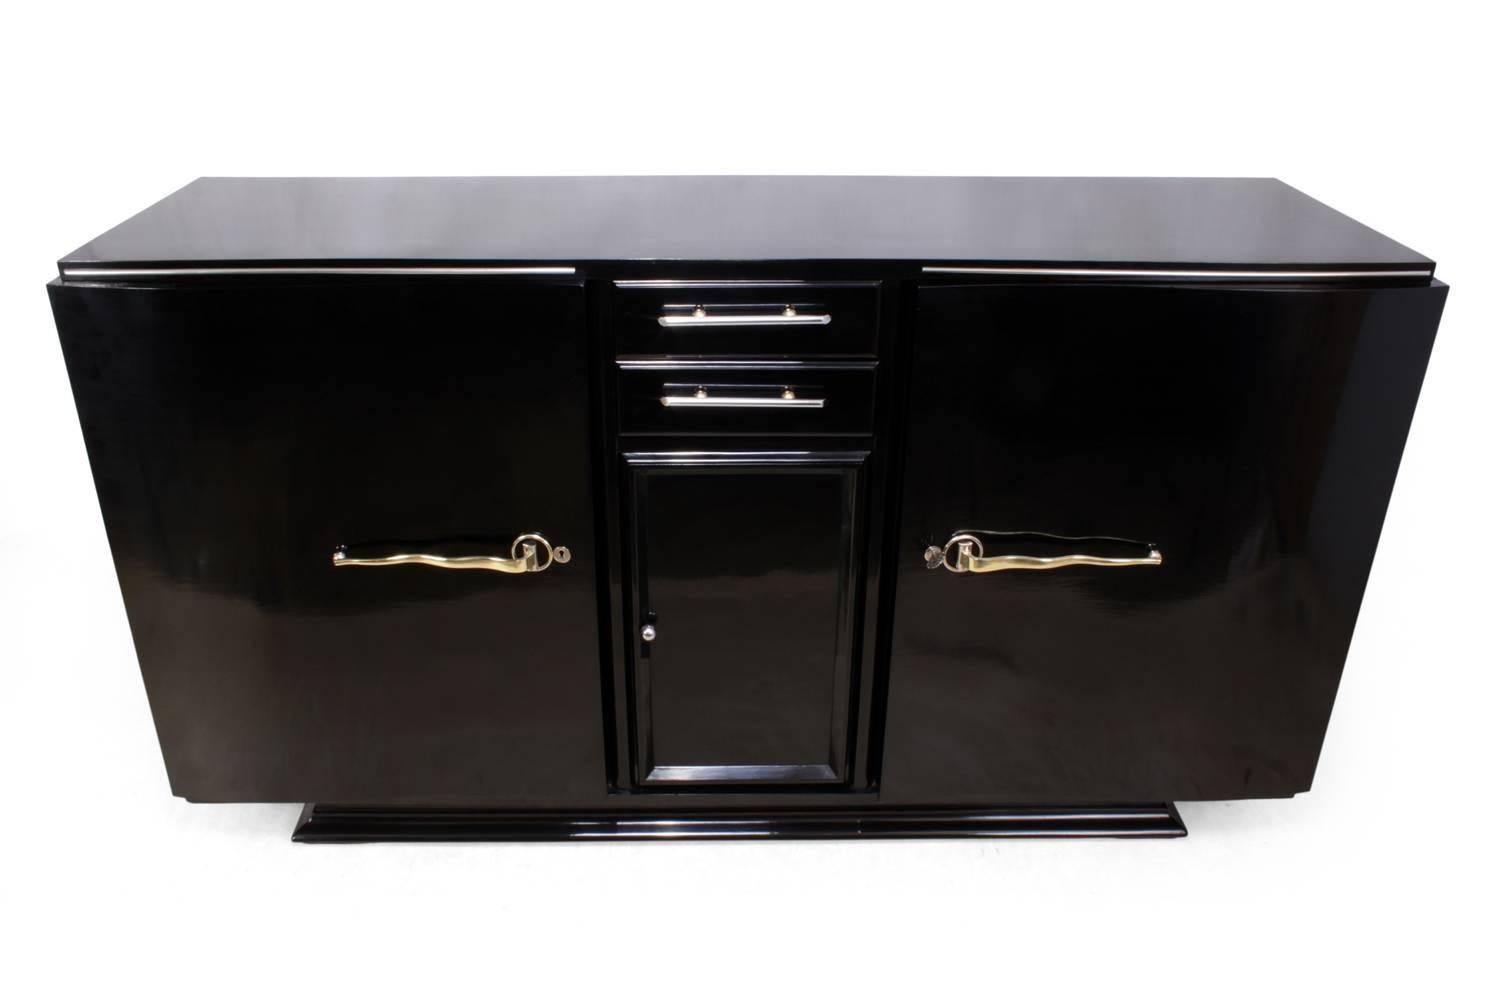 Art Deco black piano lacquer sideboard, circa 1930
This sideboard has two central drawers with a cupboard below and two large shaped doors either side, it has brass and chrome fitting with one key that locks the two large doors, the sideboard has